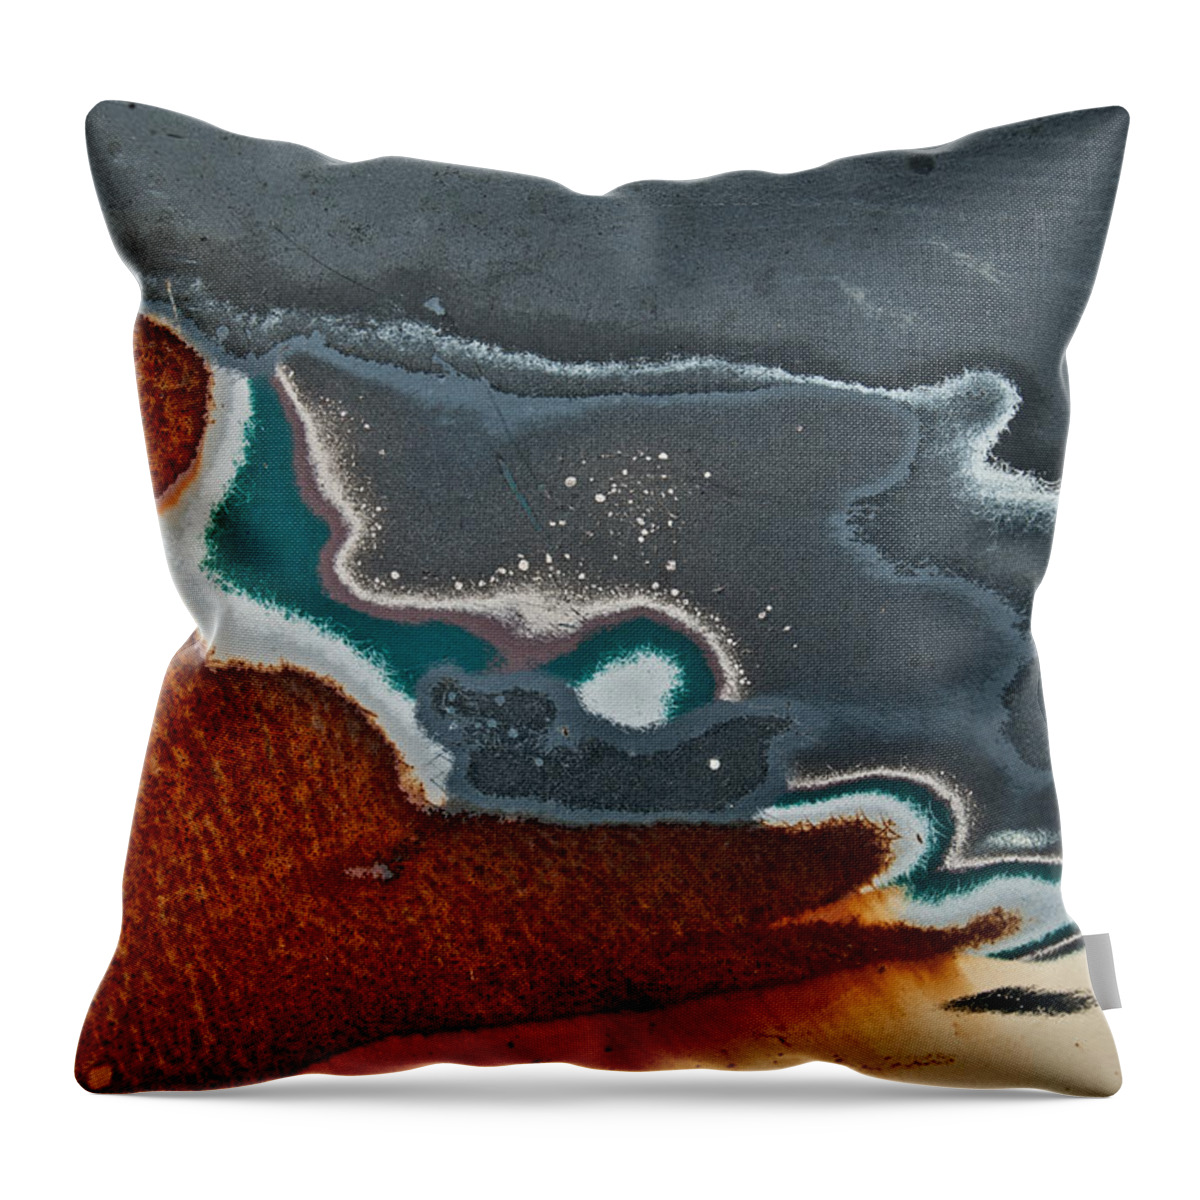 Abstract Throw Pillow featuring the photograph Wave On Sand by Jani Freimann